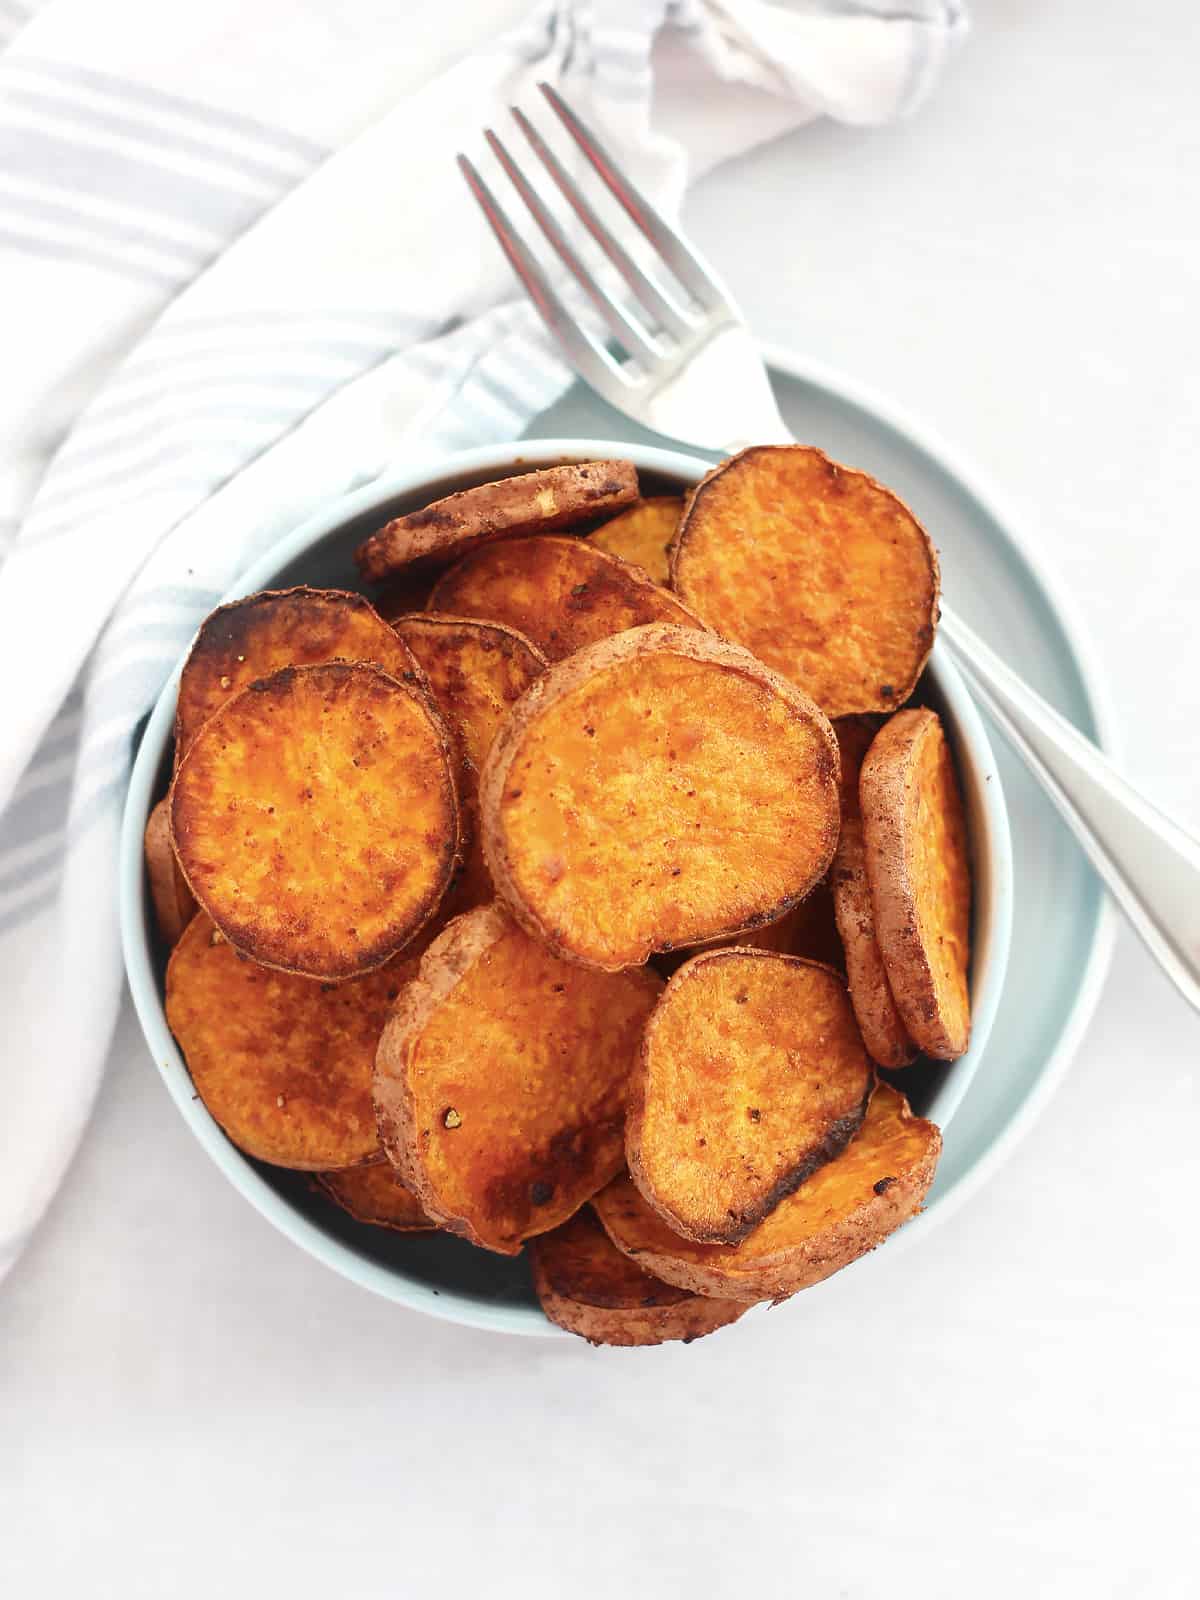 Overjead shot of baked sweet potato slices in a bowl with a fork.